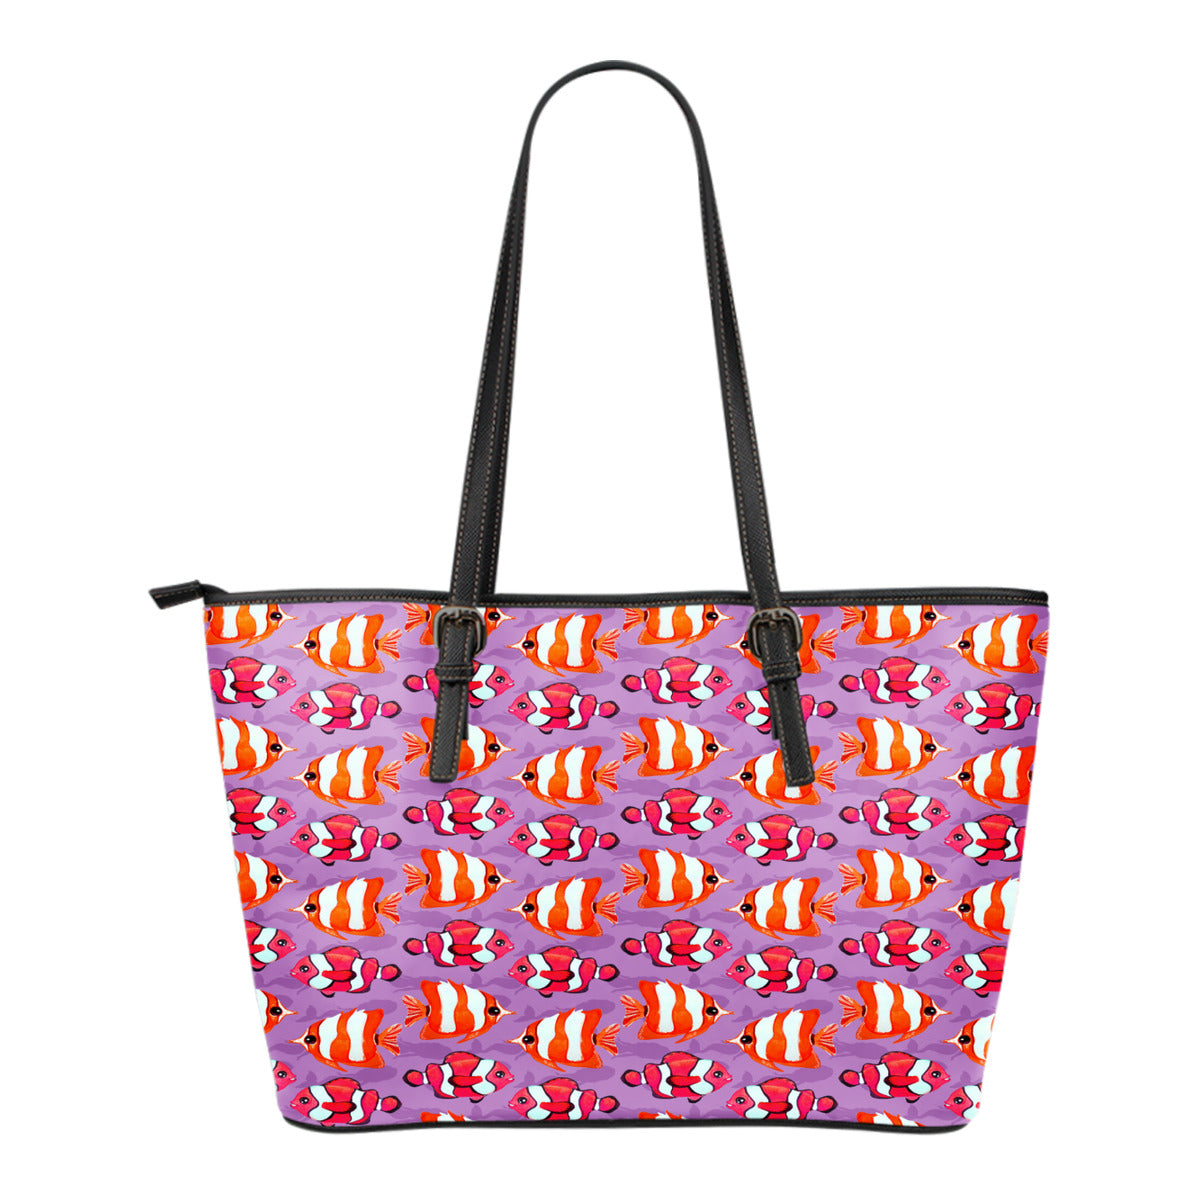 Mermaid Themed Design C2 Women Small Leather Tote Bag